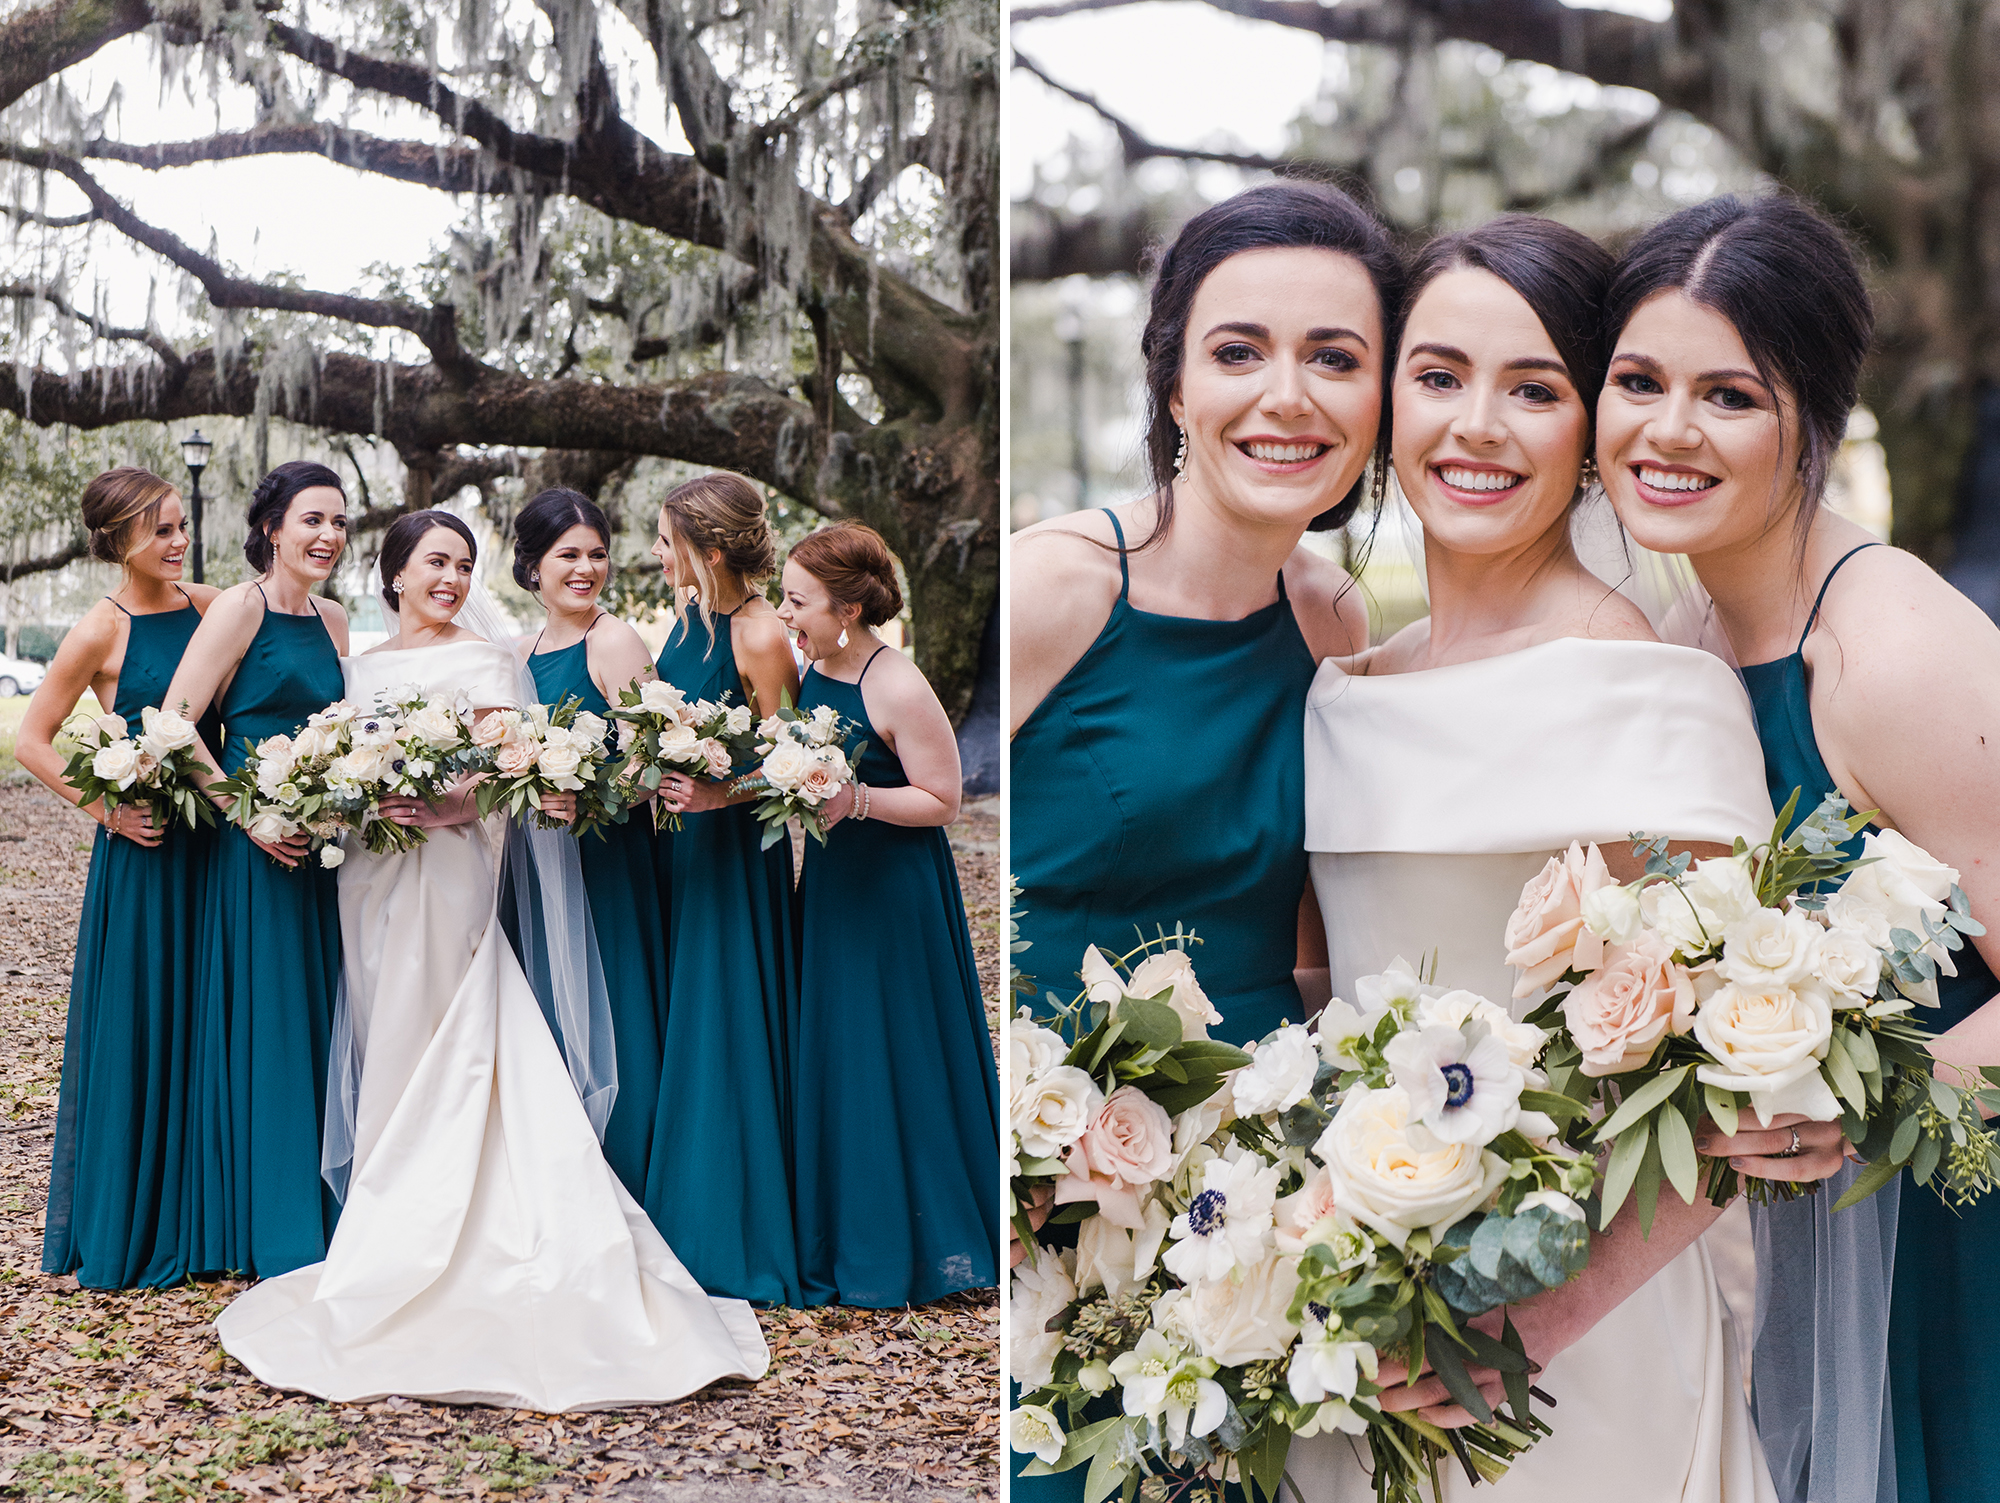 Our Lady of the Rosary, The Arbor Room City Park Wedding: Darah + Dennis -  Catherine Guidry Photography